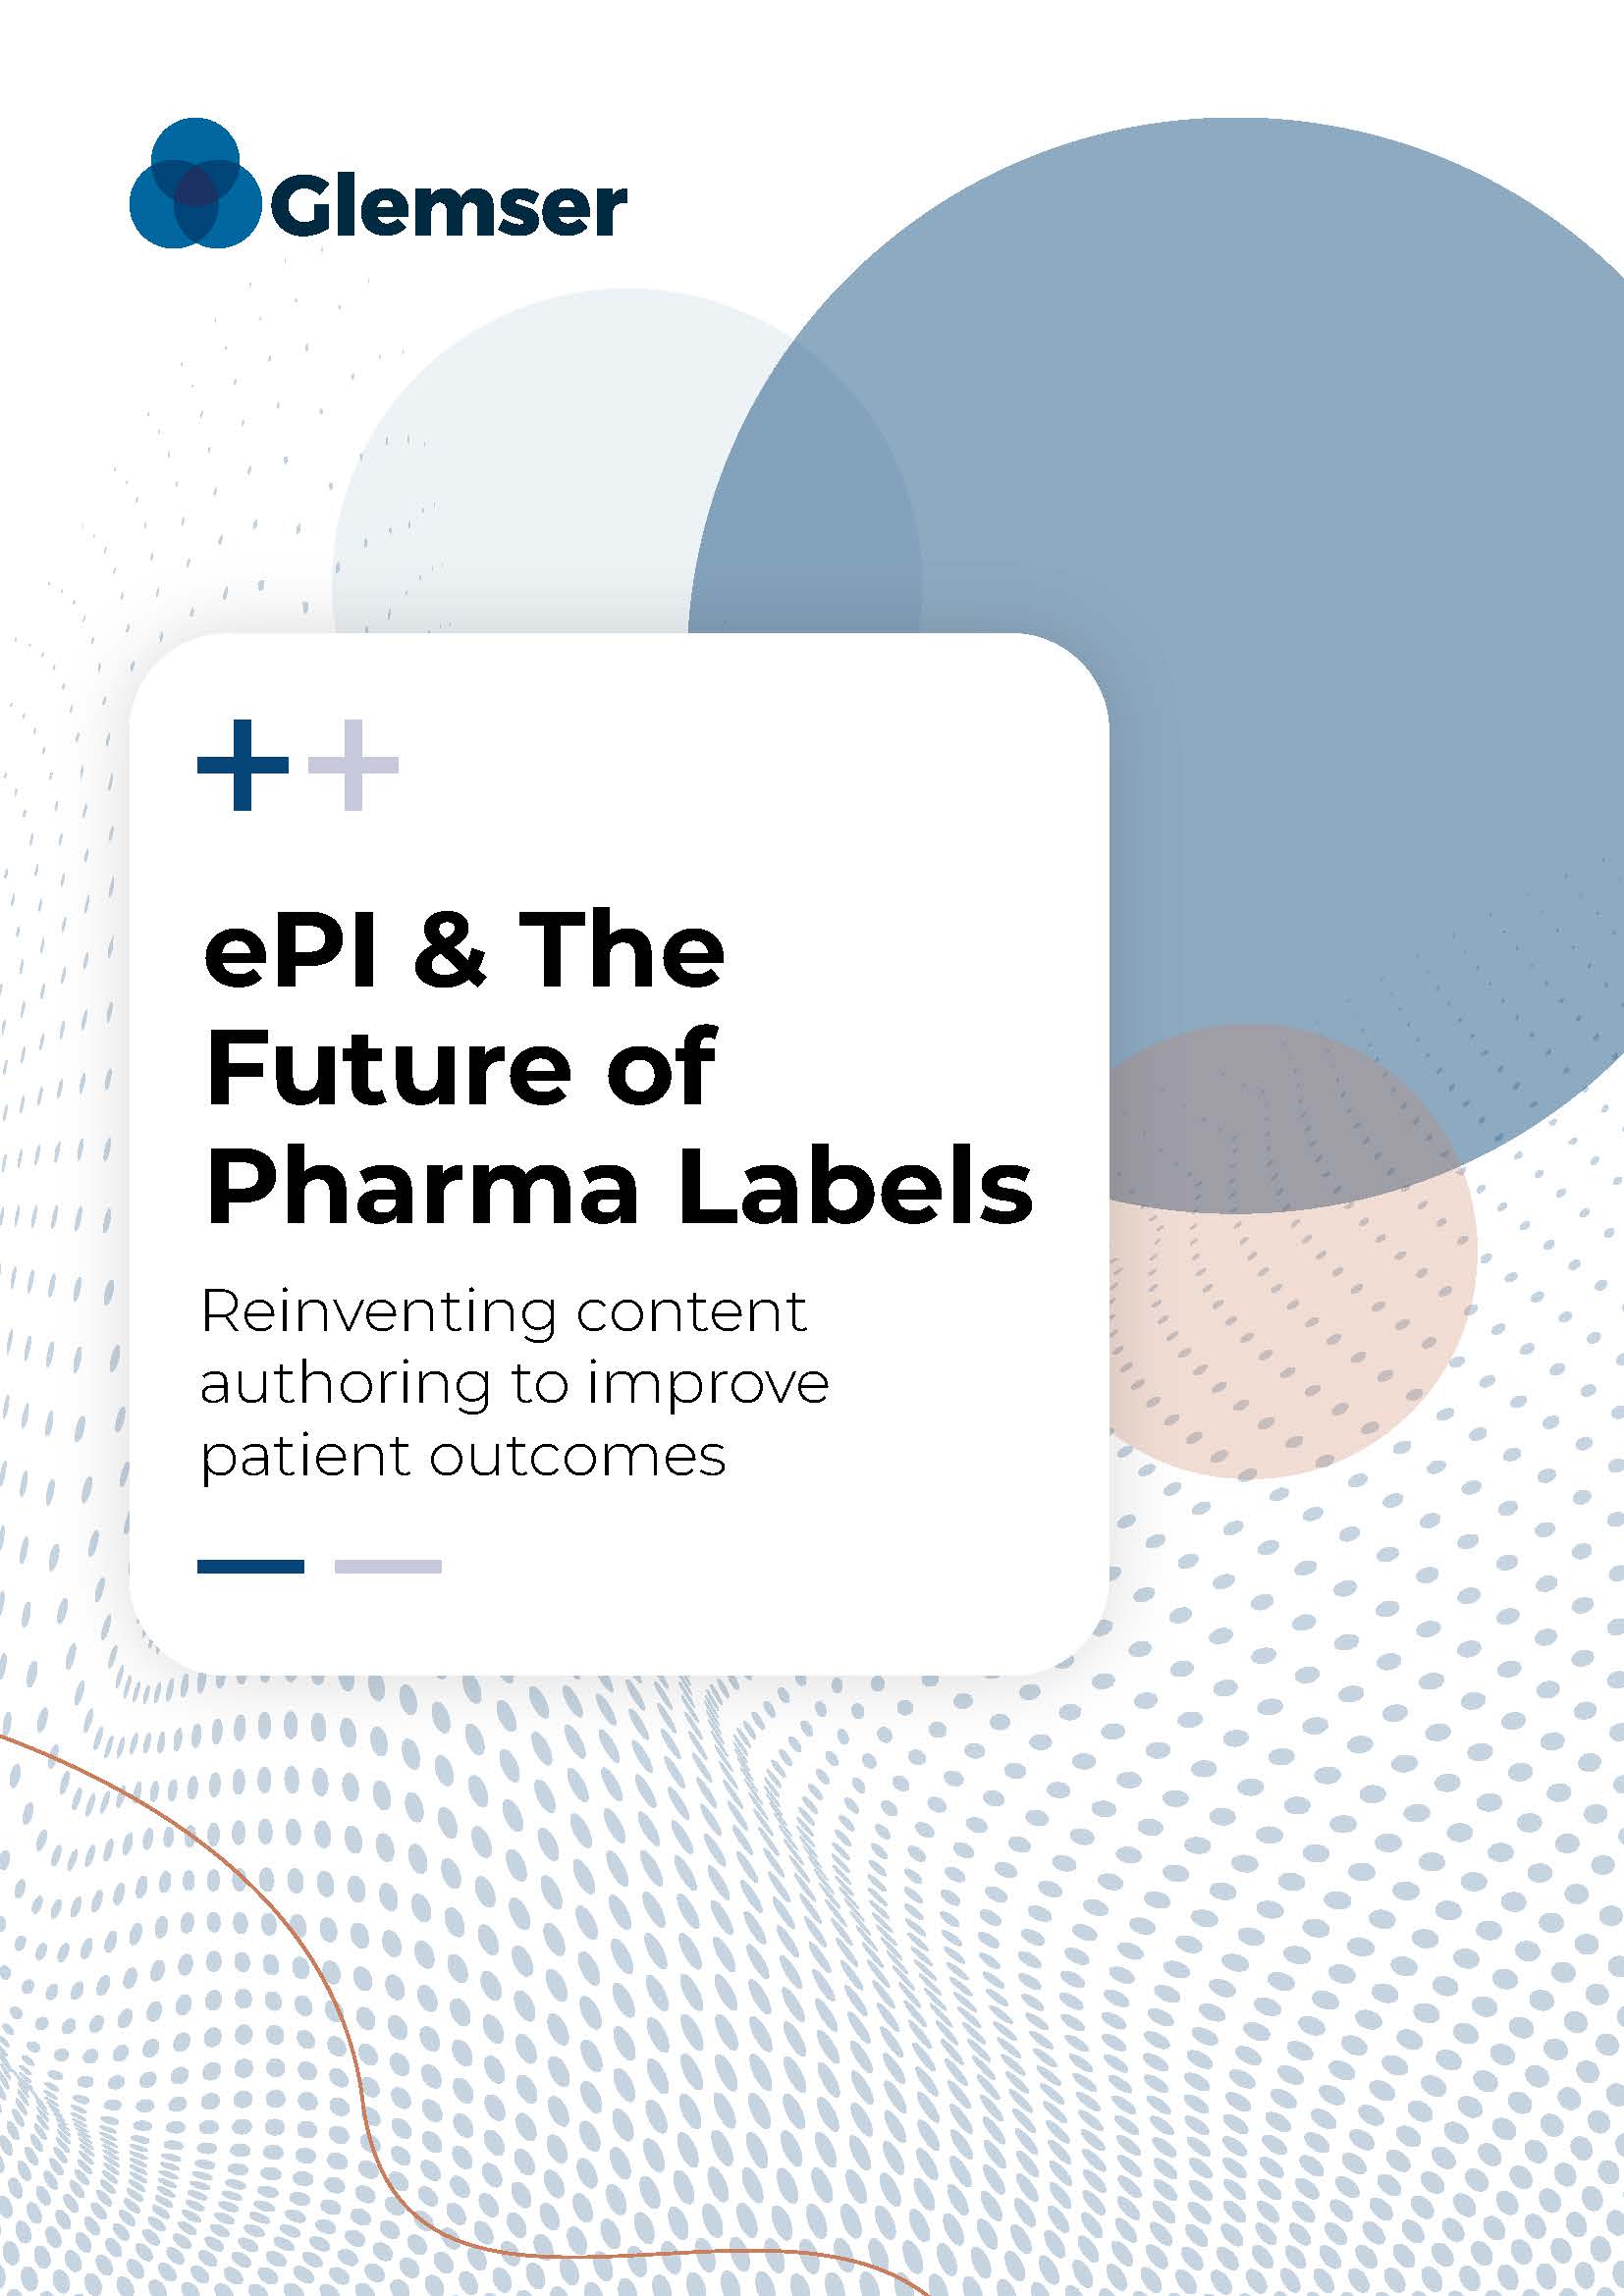 ePI & the Future of Pharma Labeling:<br />
Reinventing Content Authoring to Improve Patient Outcomes